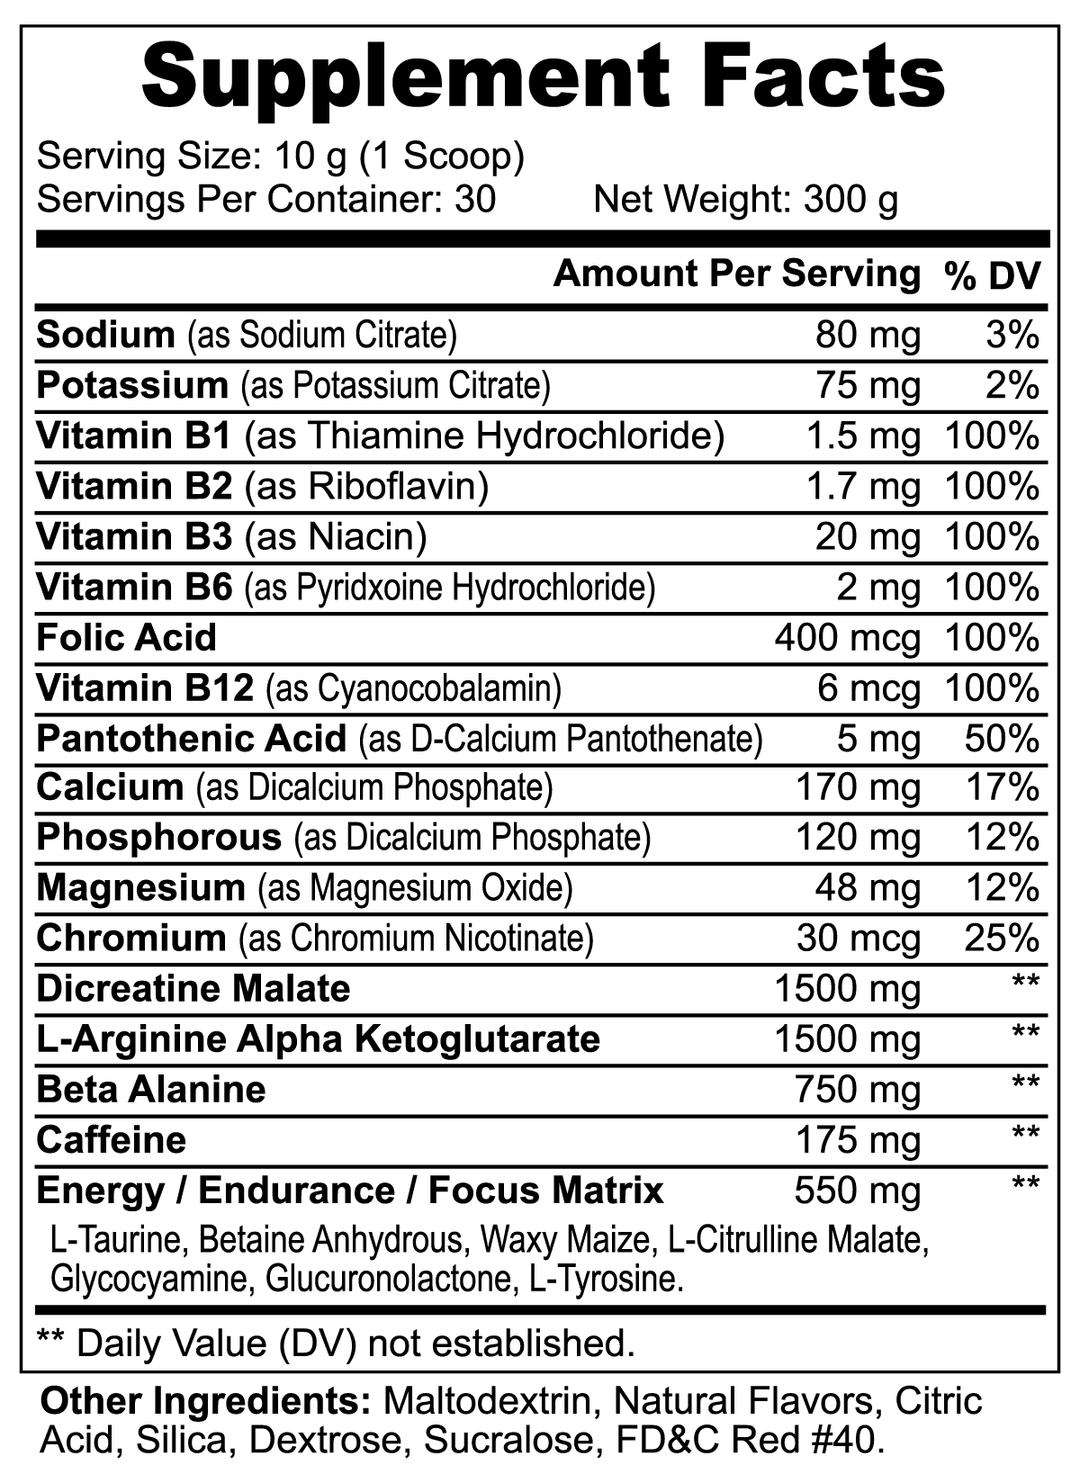 Image displaying the nutritional label of GreenHat's Nitric Shock Pre-Workout Powder (Fruit Punch), detailing serving size, ingredients, and their respective amounts and daily values for enhancing athletic performance.